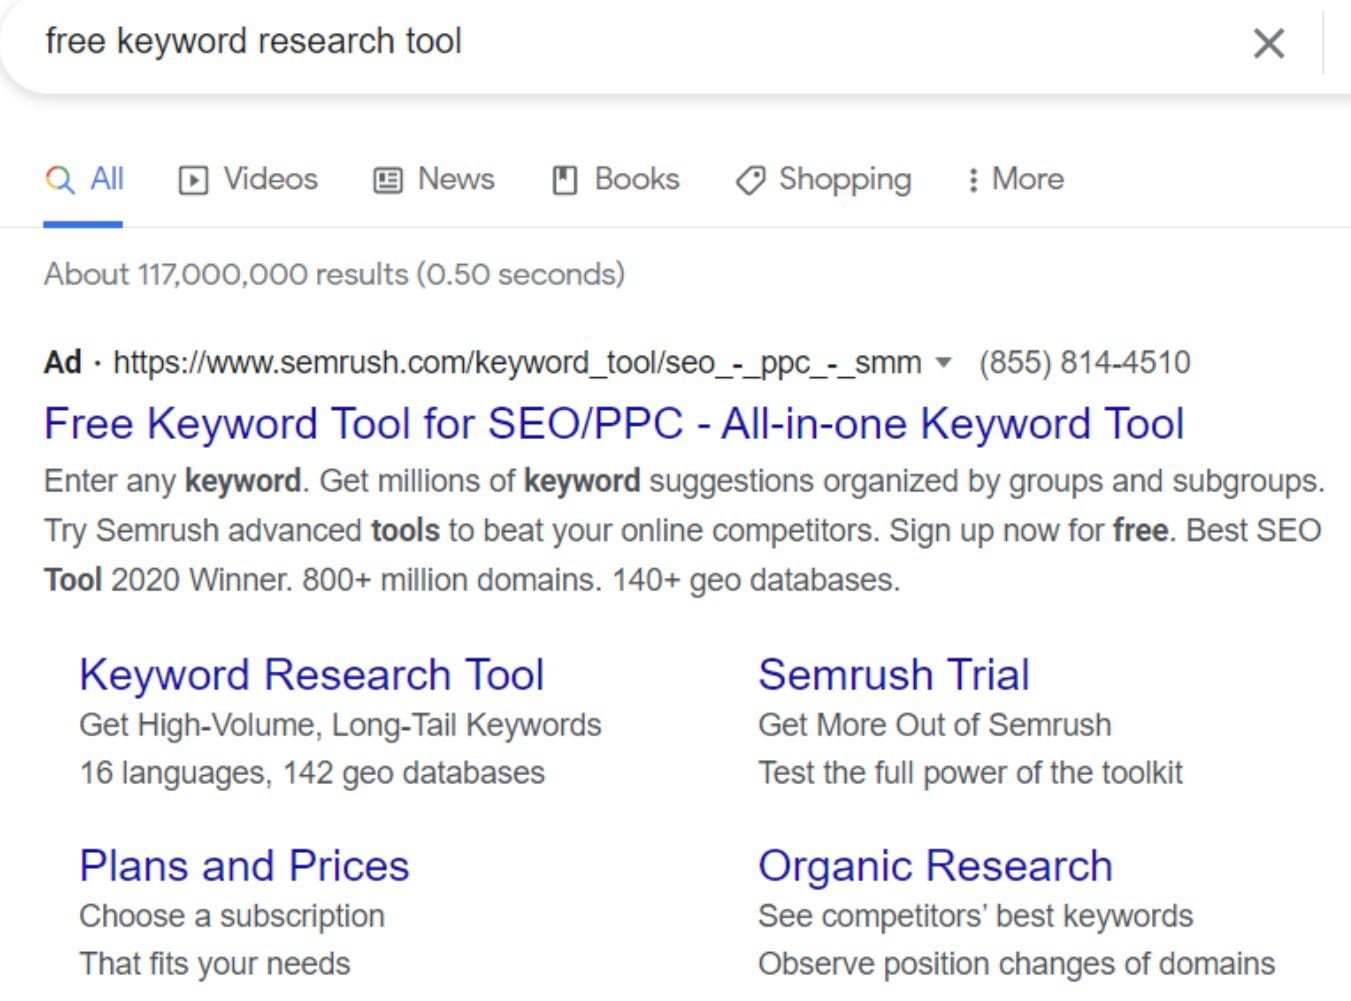 Google search results for free keyword research tool